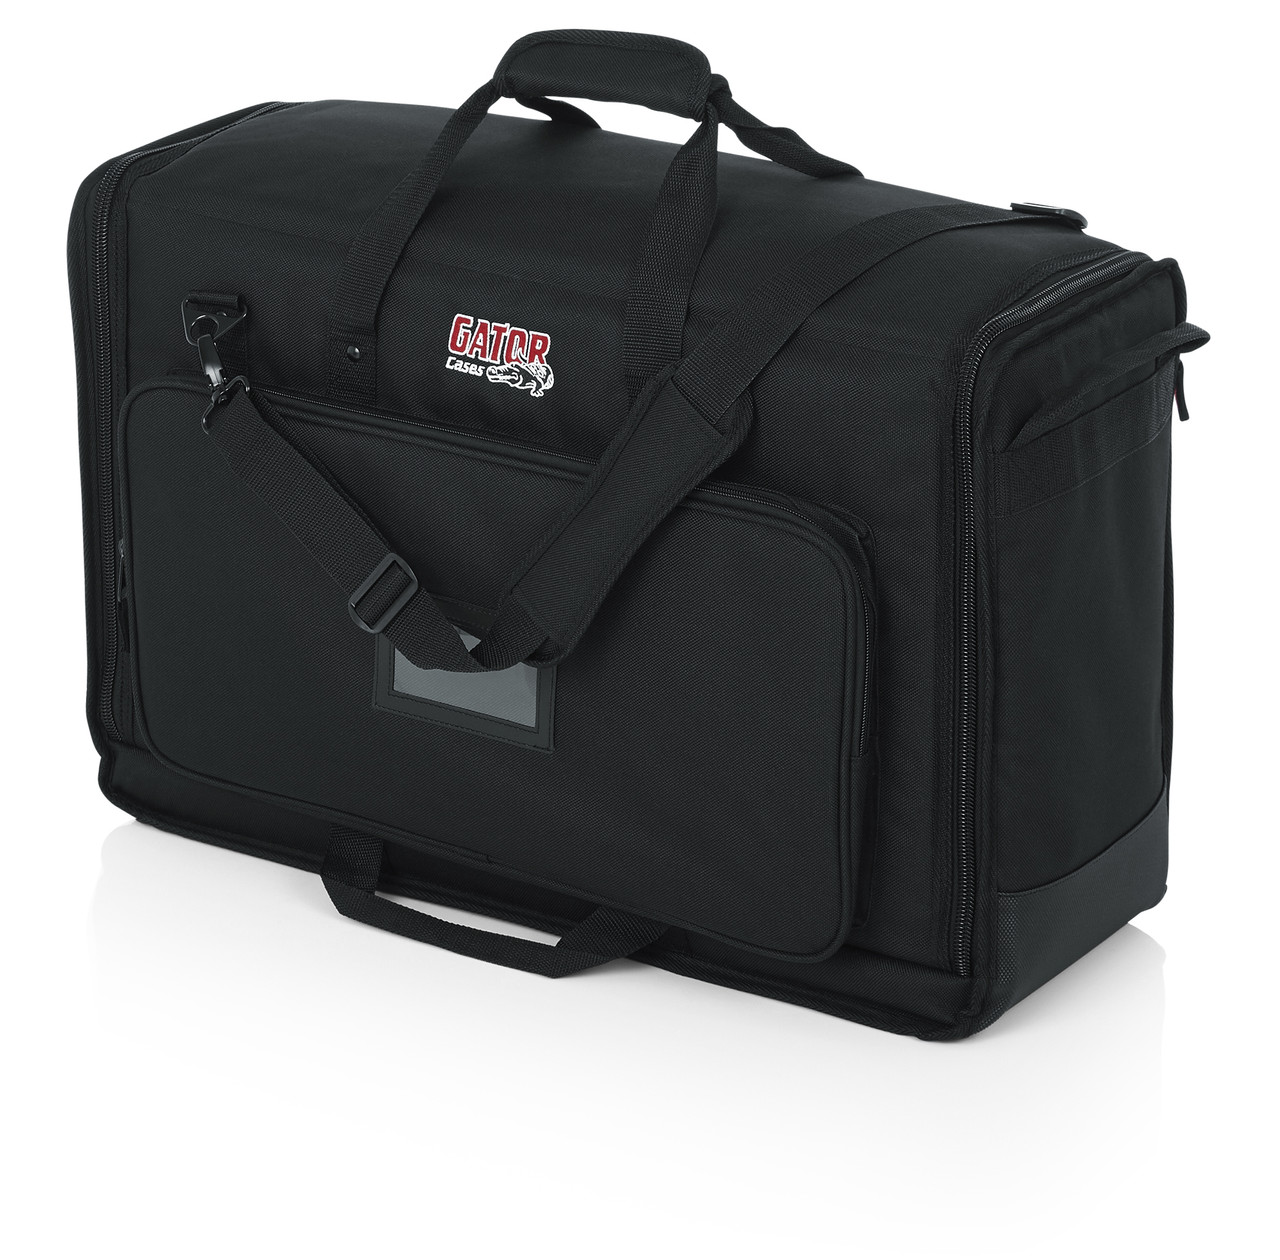 Gator G-LCD-TOTE-SMX2 Small Padded Dual LCD Transport Bag 